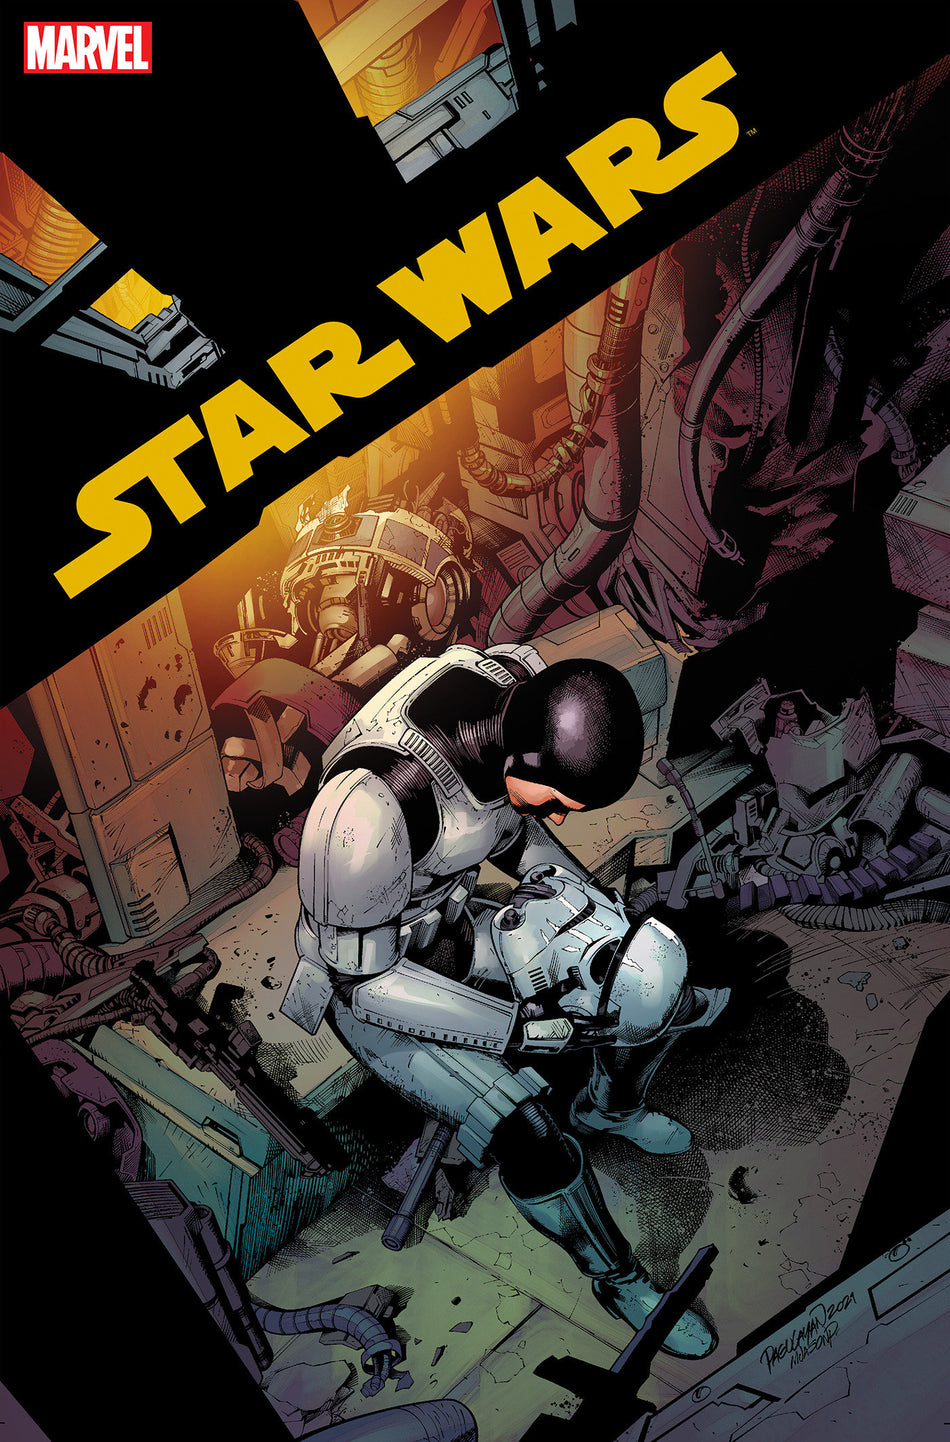 Image of Star Wars 21 Pagulayan Variant comic sold by Stronghold Collectibles.